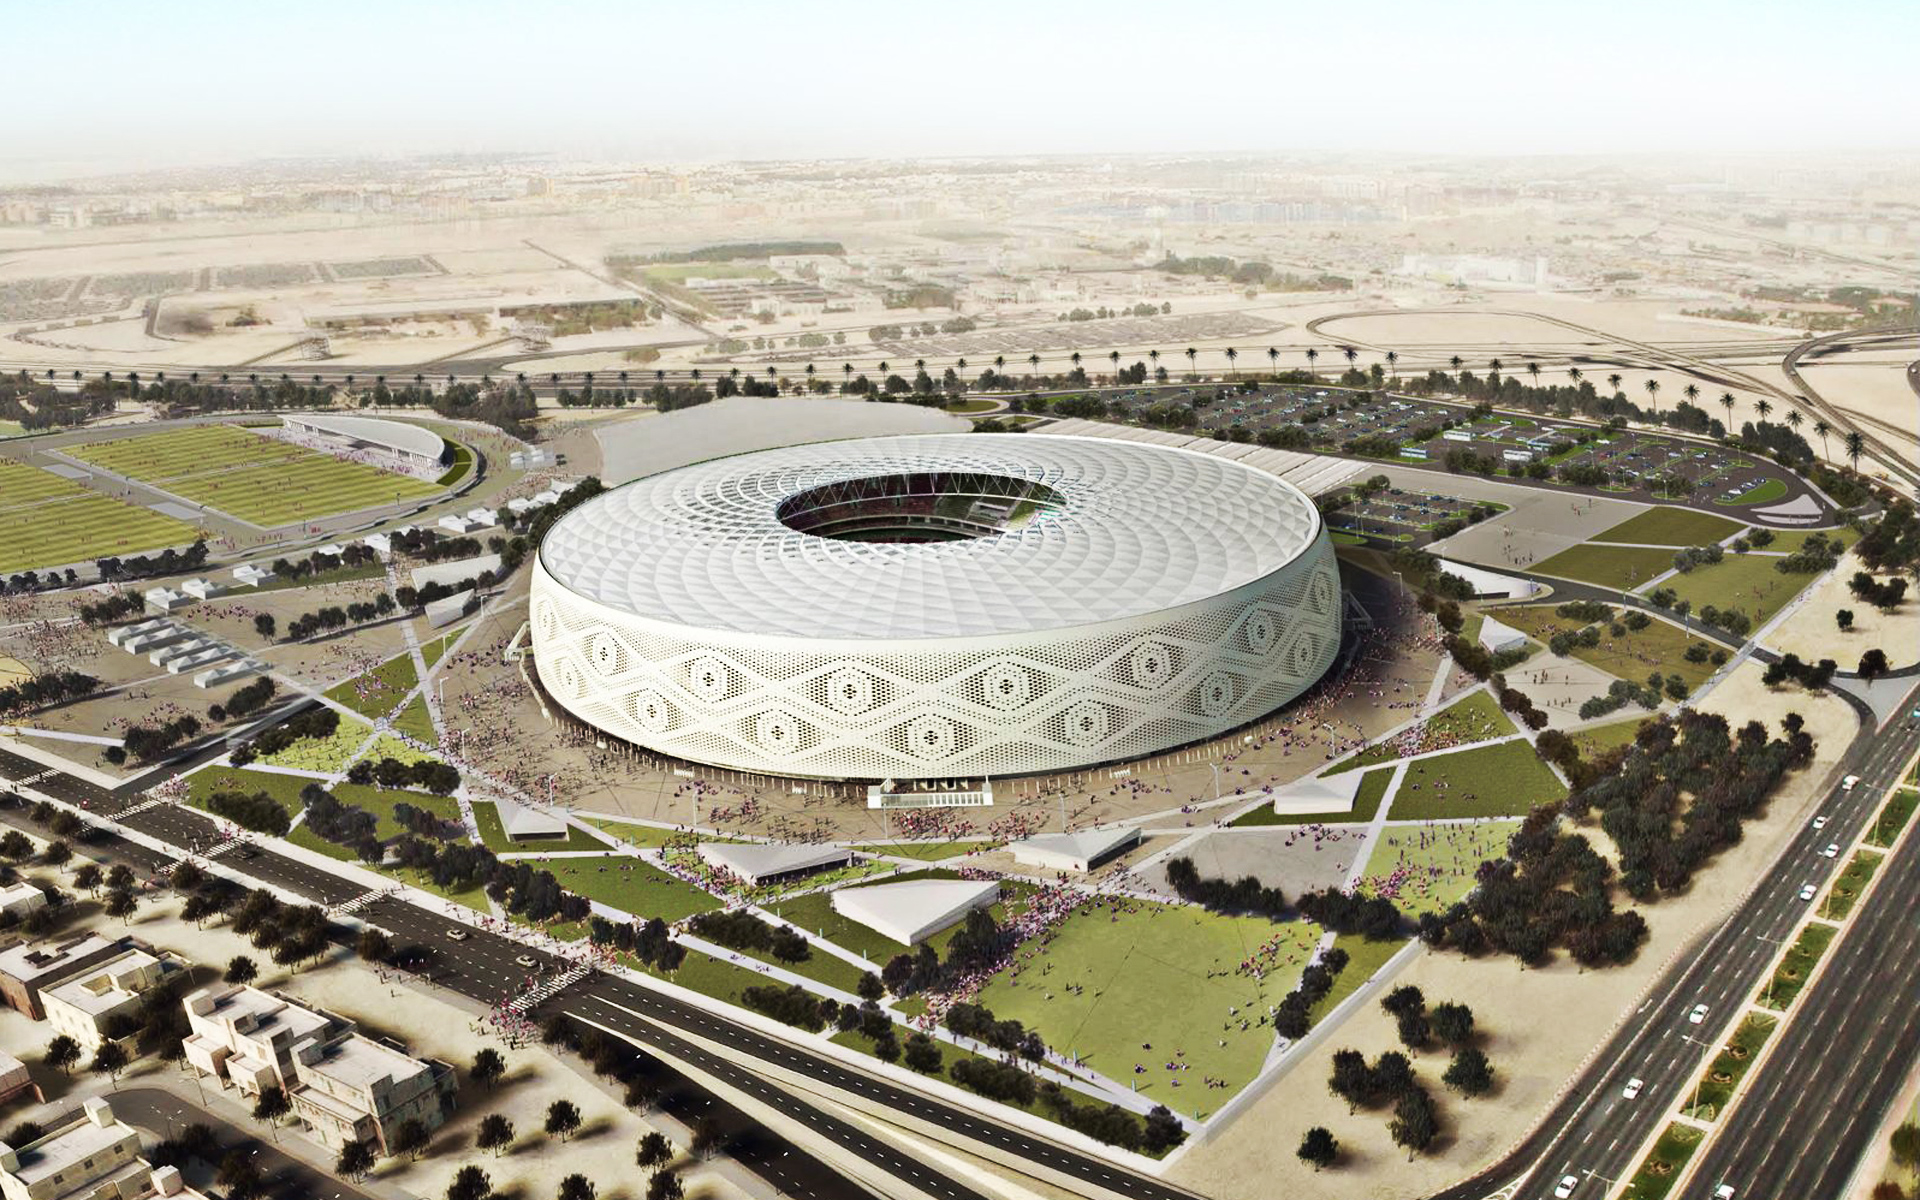 Pin by Snip on Wallpaper  Qatar world cup stadiums, World cup